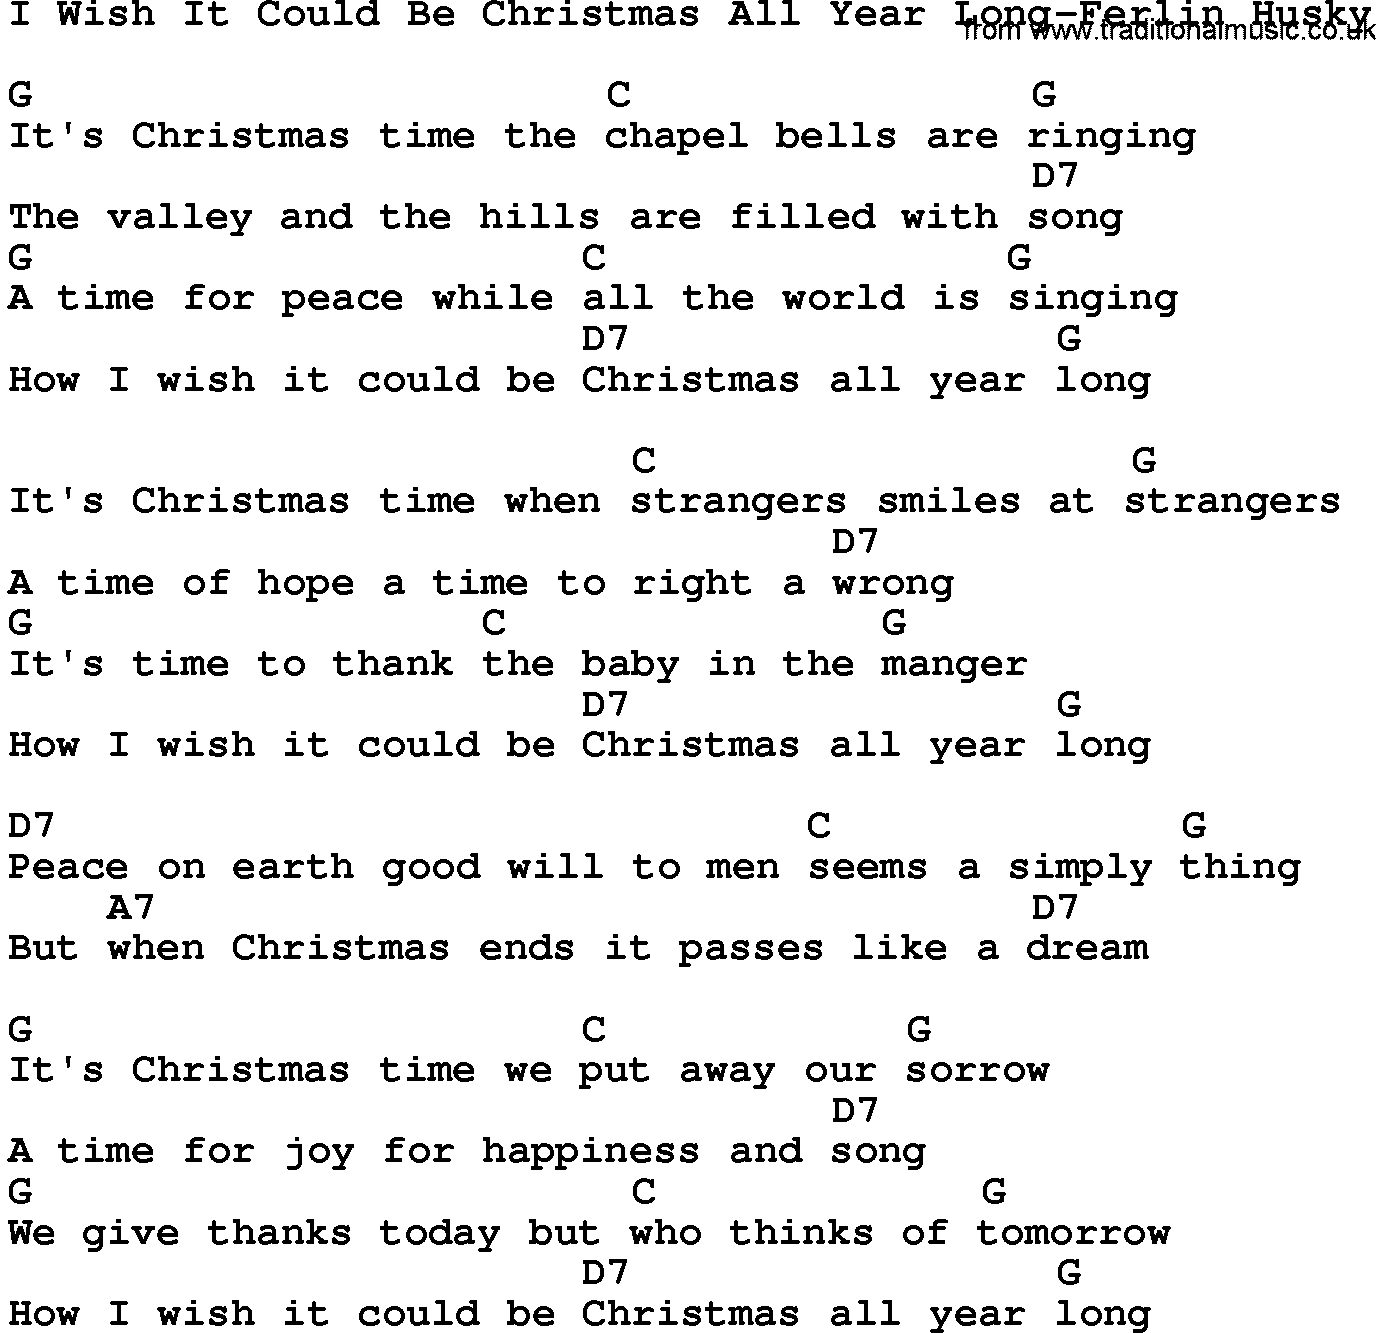 Country music song: I Wish It Could Be Christmas All Year Long-Ferlin Husky lyrics and chords